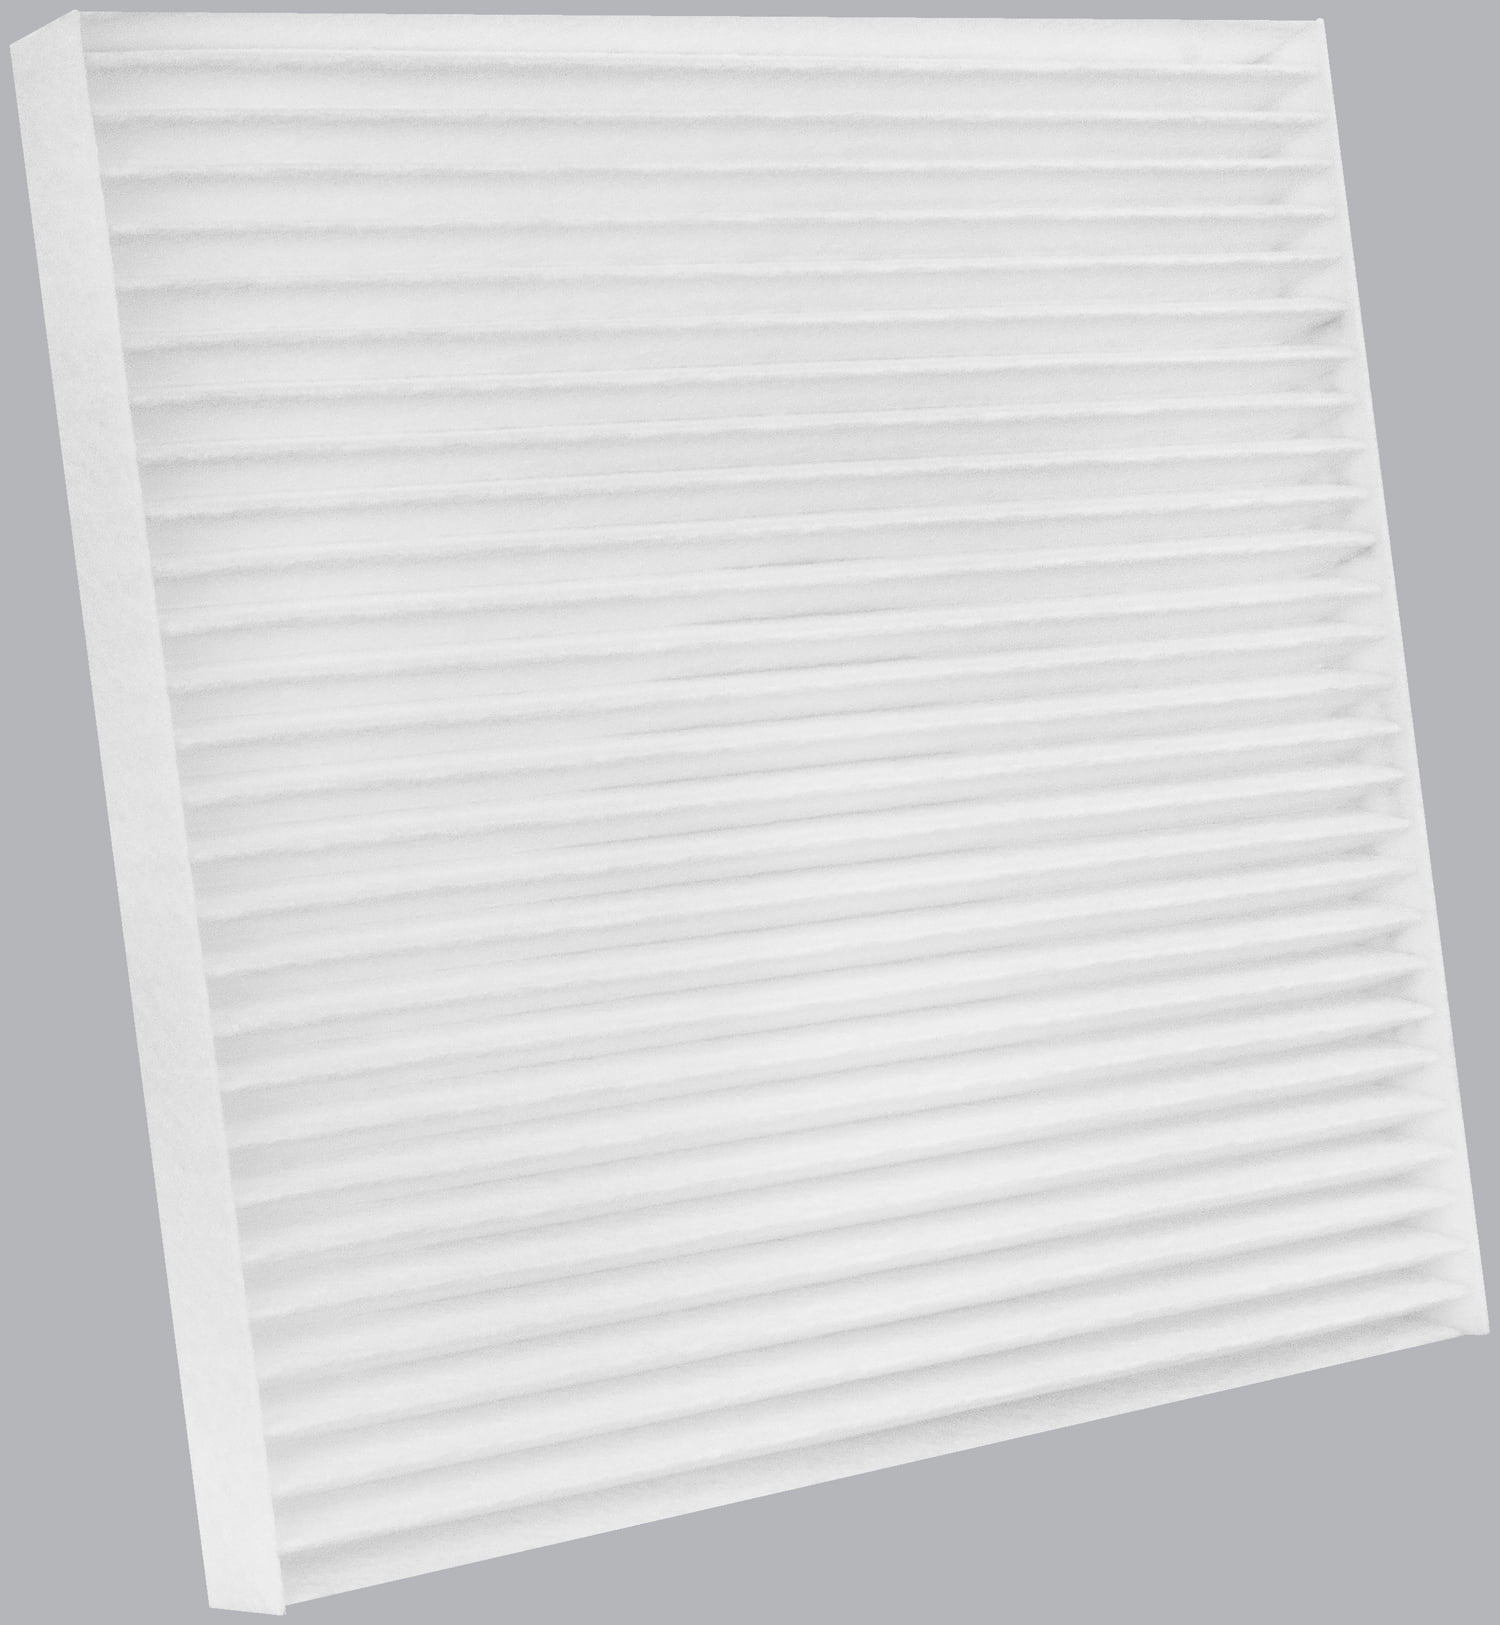 Details about   For 2012-2019 Nissan Versa Cabin Air Filter 16766FY 2013 2014 2015 2016 2017